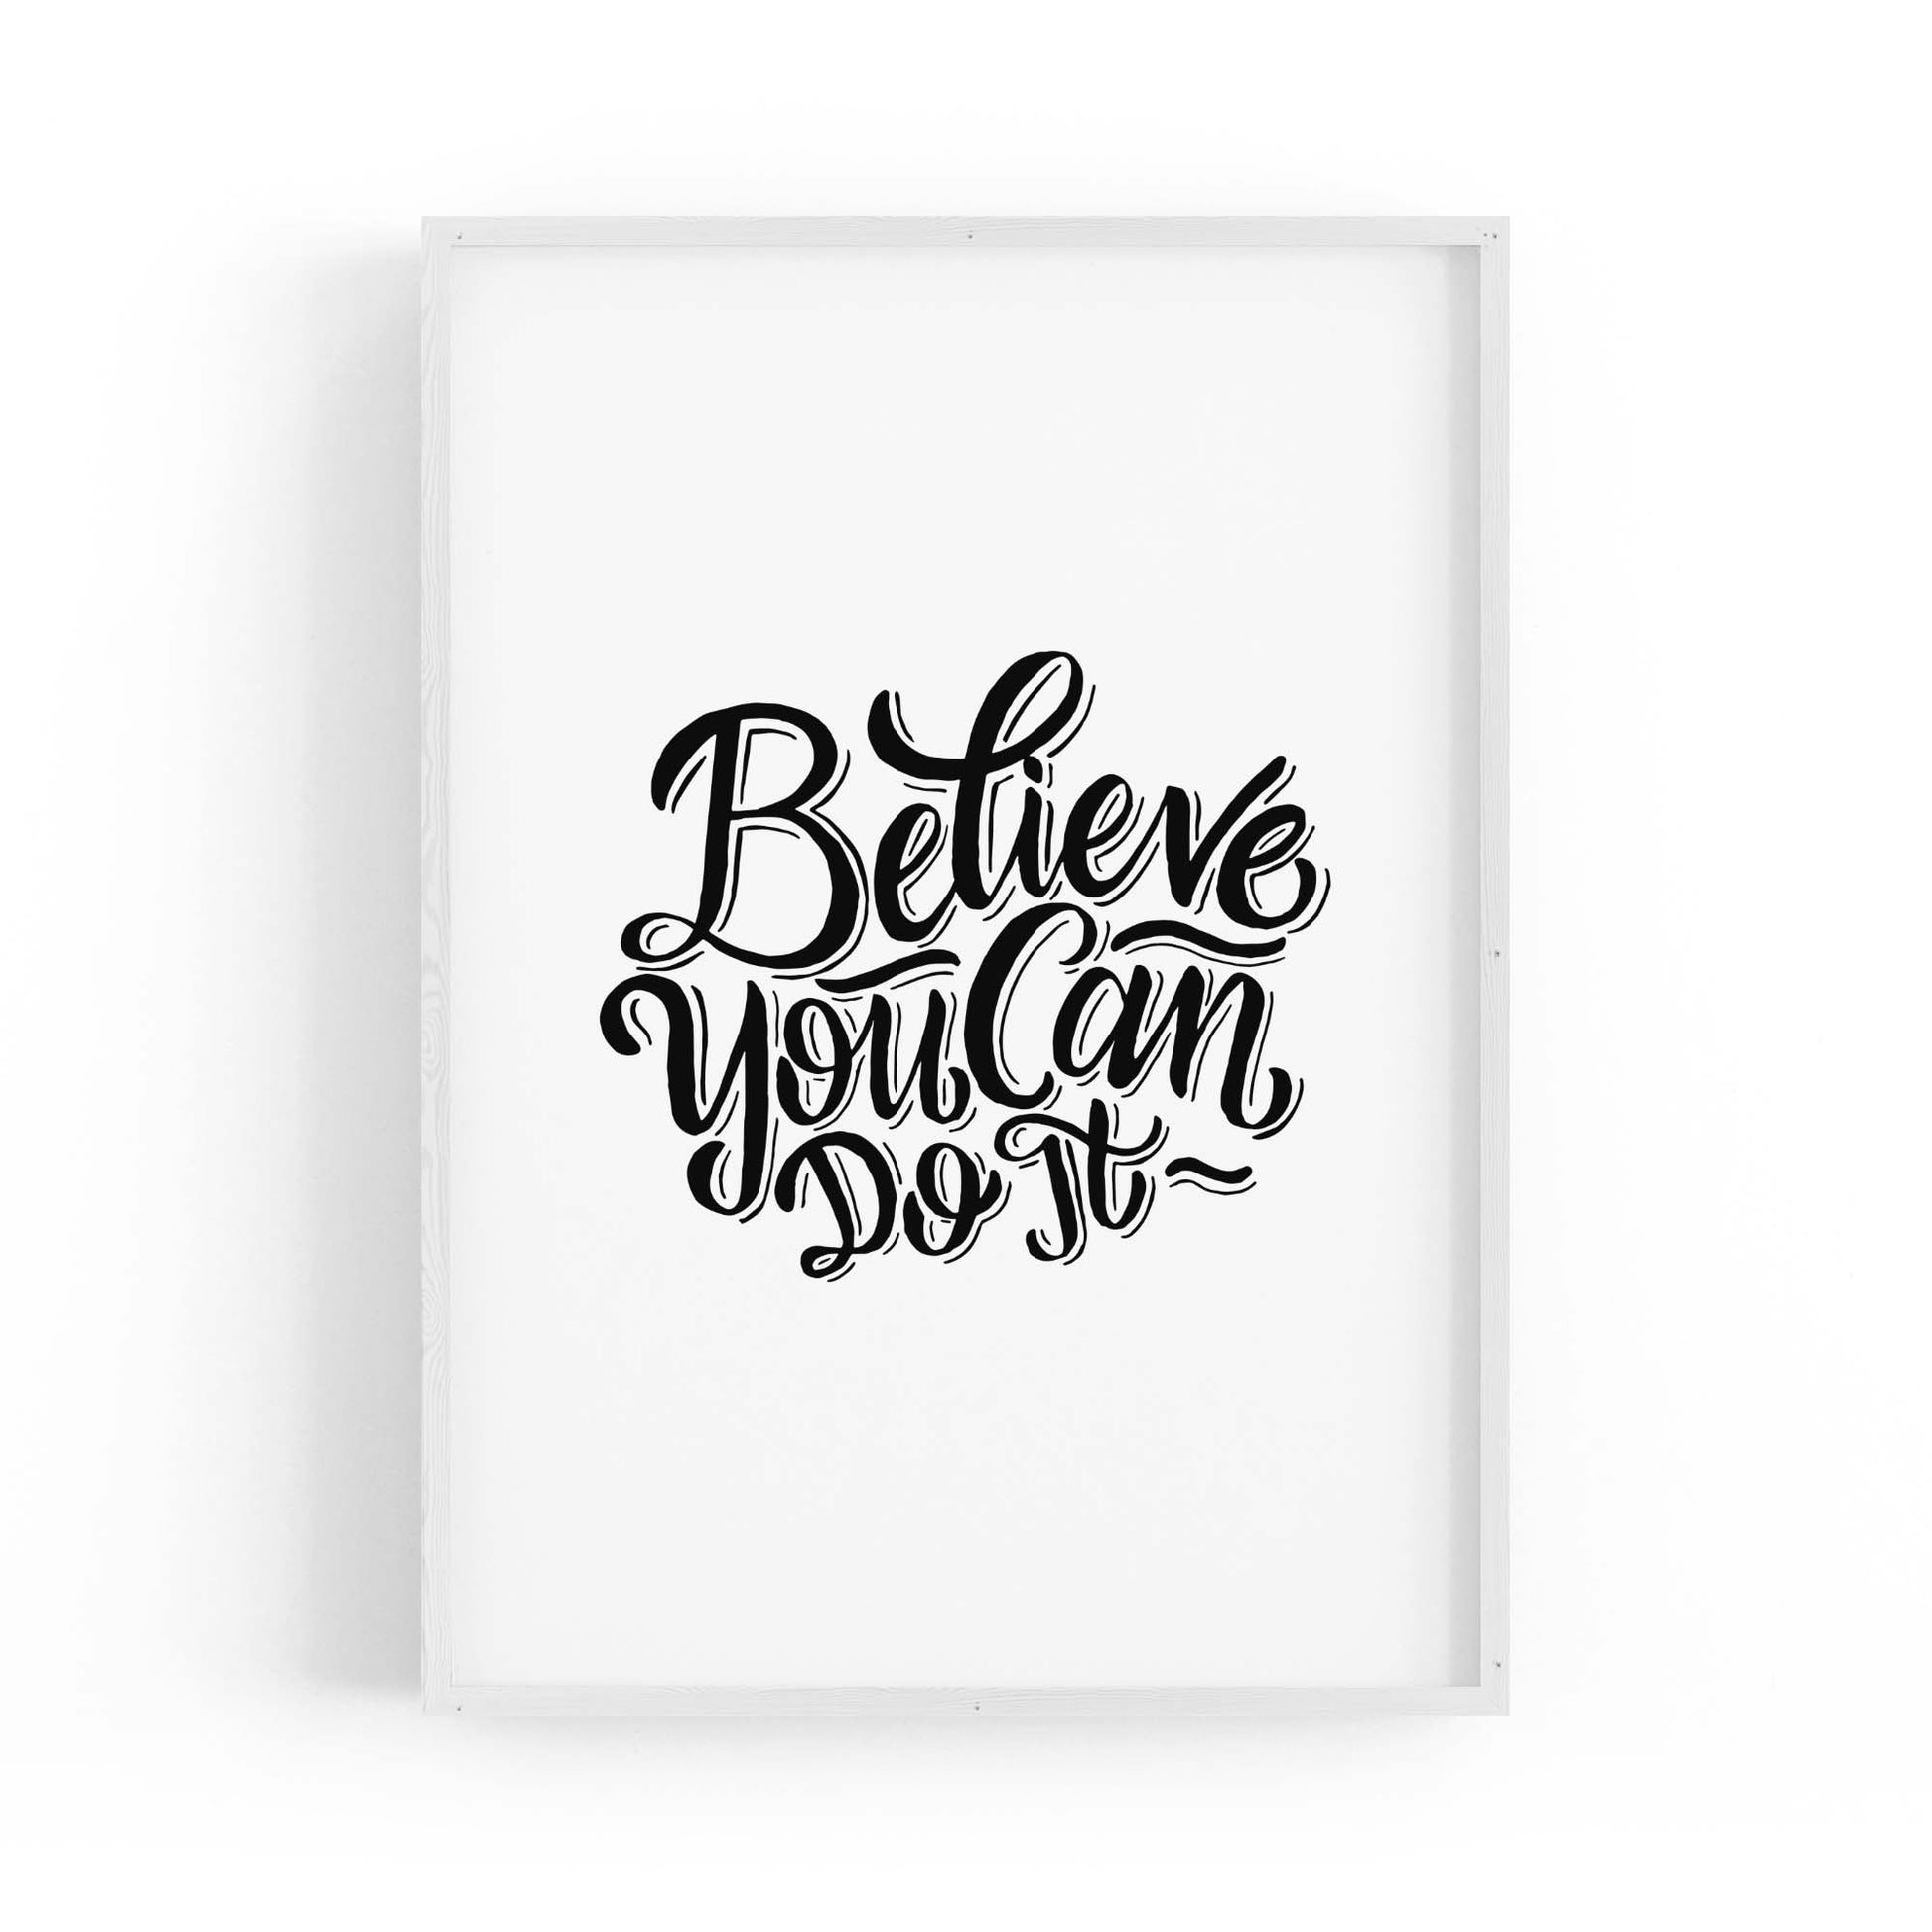 "Believe You Can Do It" Motivational Quote Wall Art - The Affordable Art Company